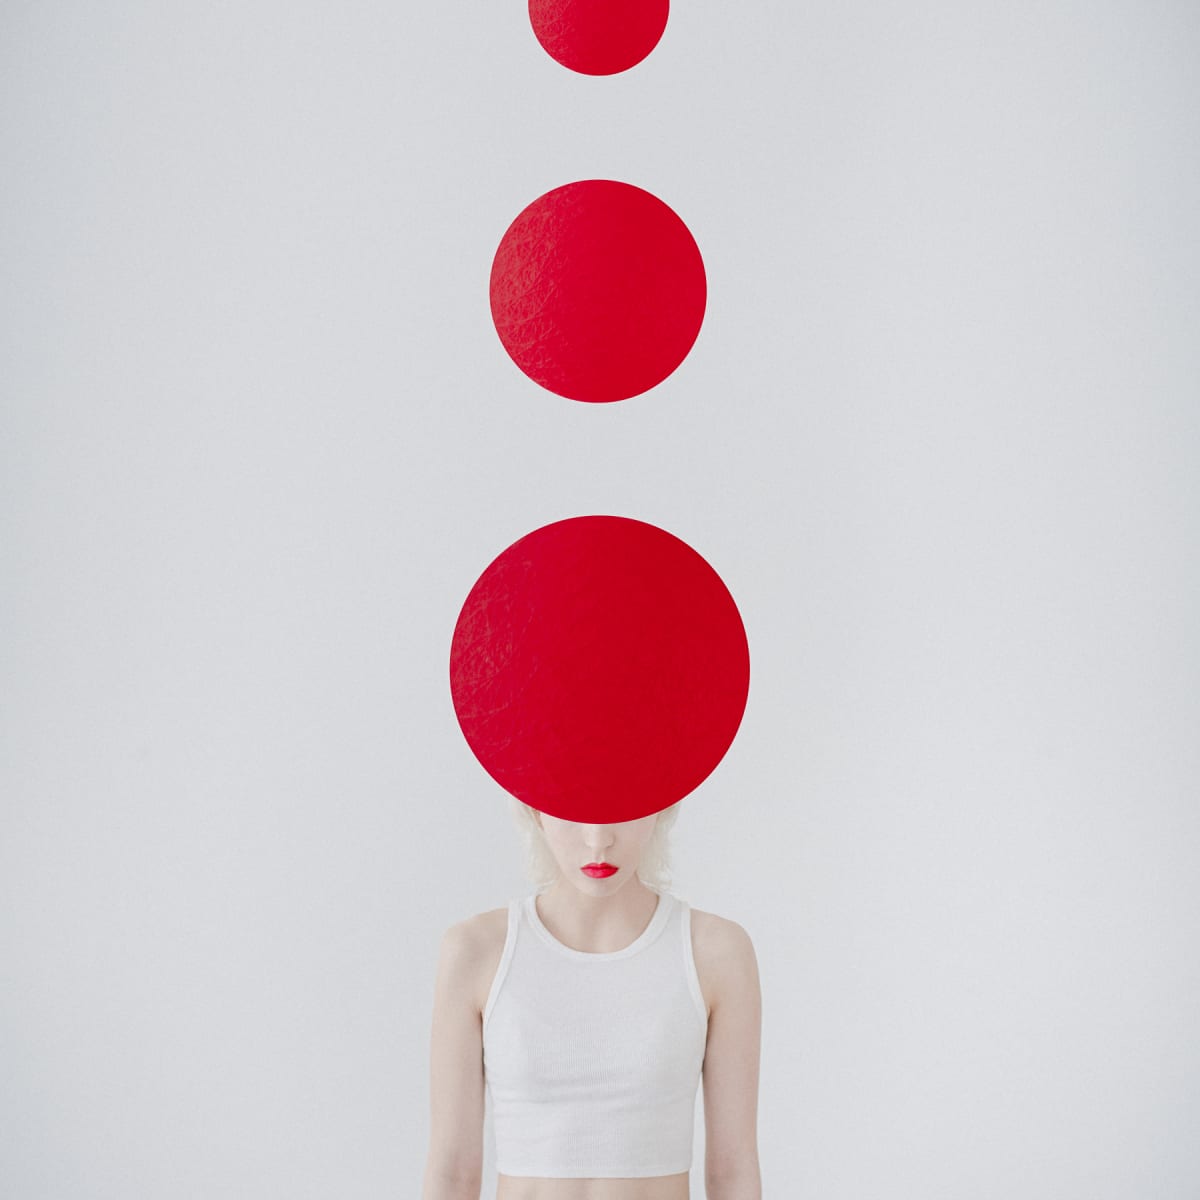 Offload by Dasha Pears  Image: Some words should be written in bold, some in thin lines.  The best pieces are balanced.